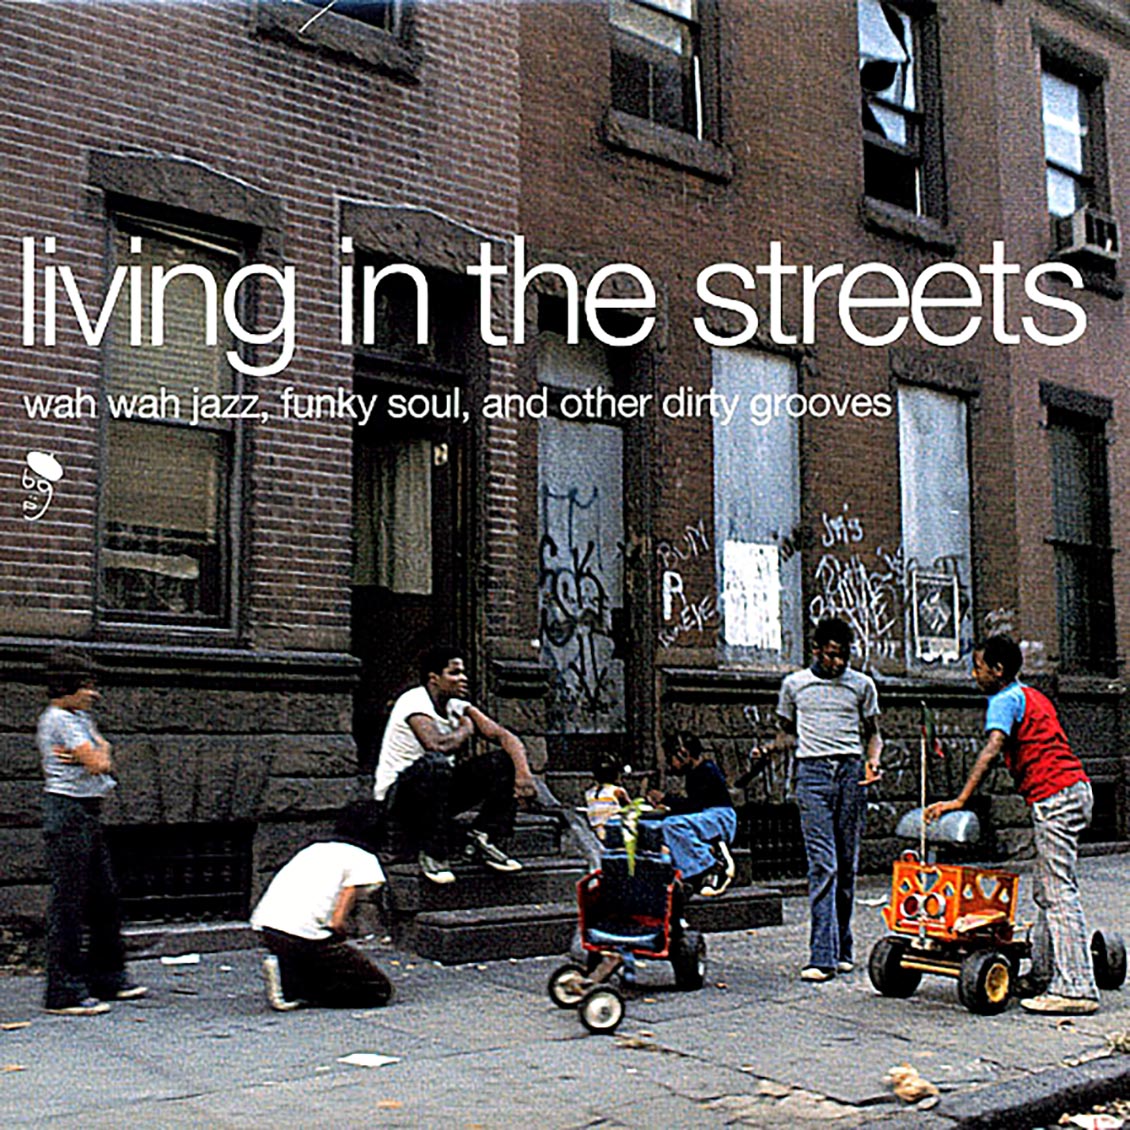 Cal Tjader, Isaac Hayes, Idris Muhammad, Dave Hamilton, Etc. - Living In The Streets: Wah Wah Jazz, Funky Soul, And Other Dirty Grooves (2xLP) - Vinyl LP